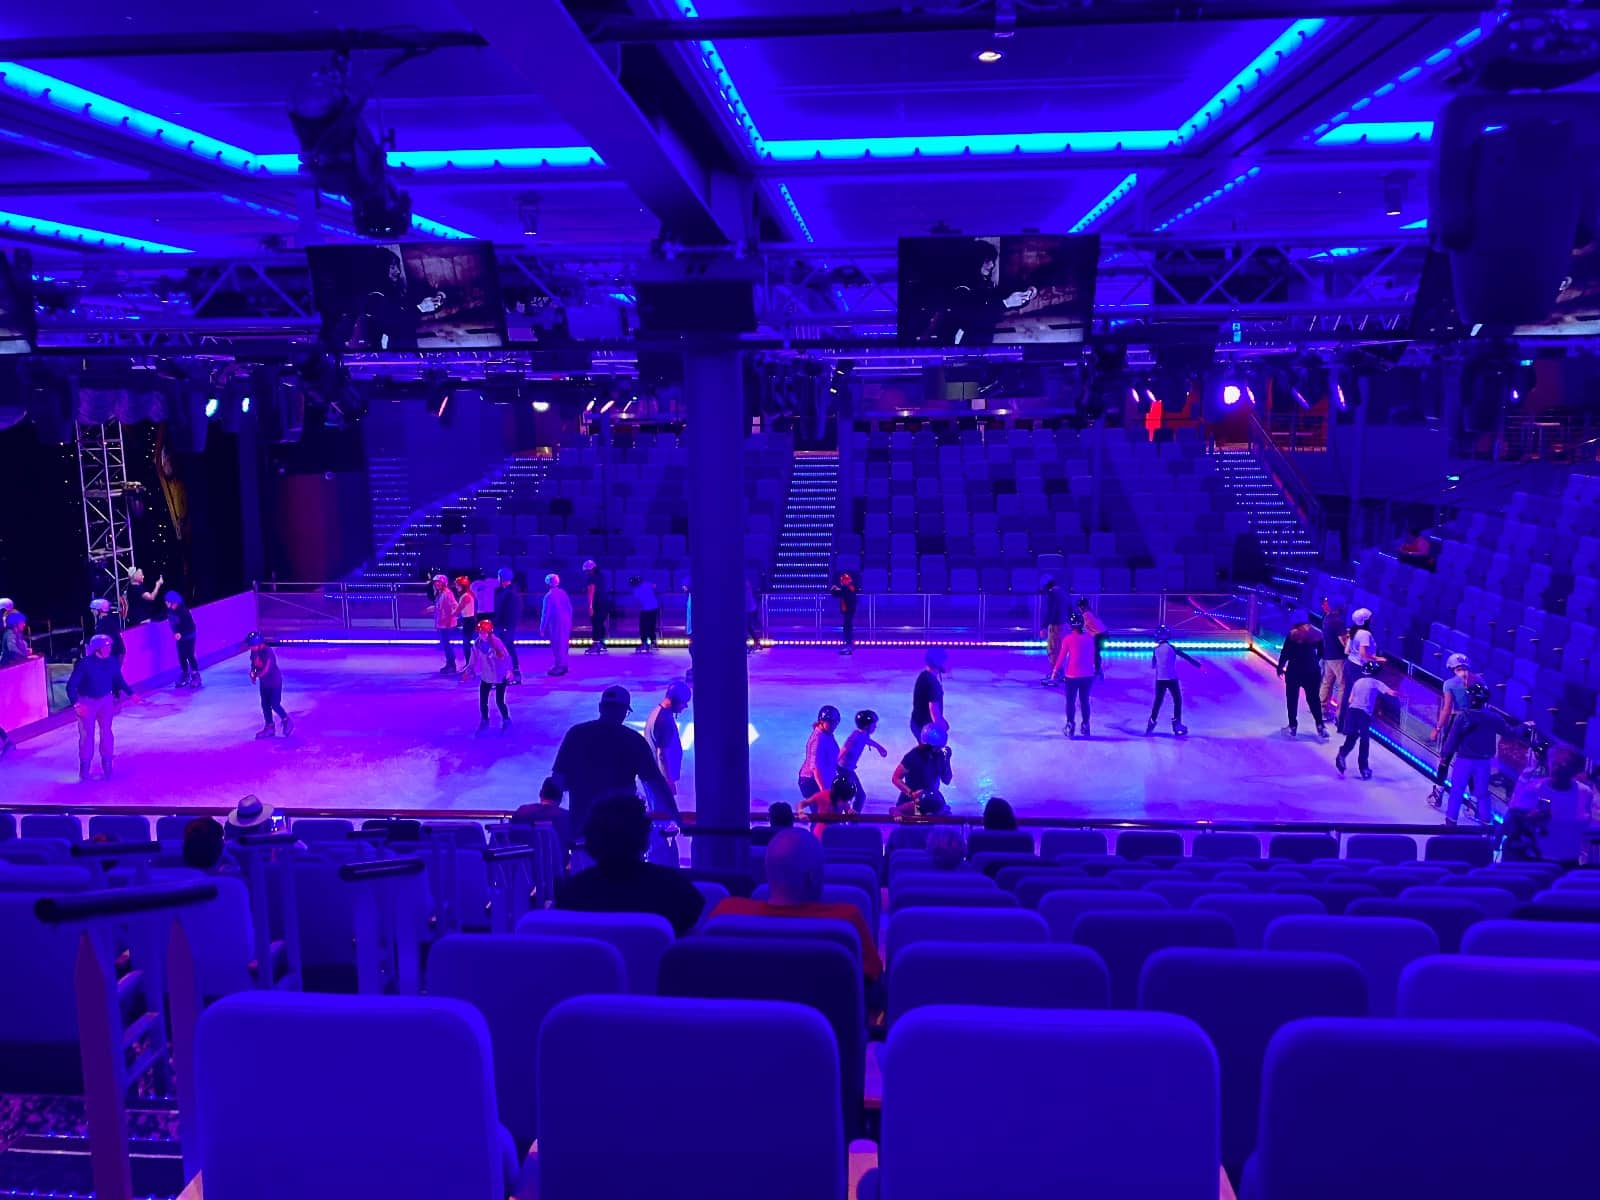 a group of people on ice in a theater